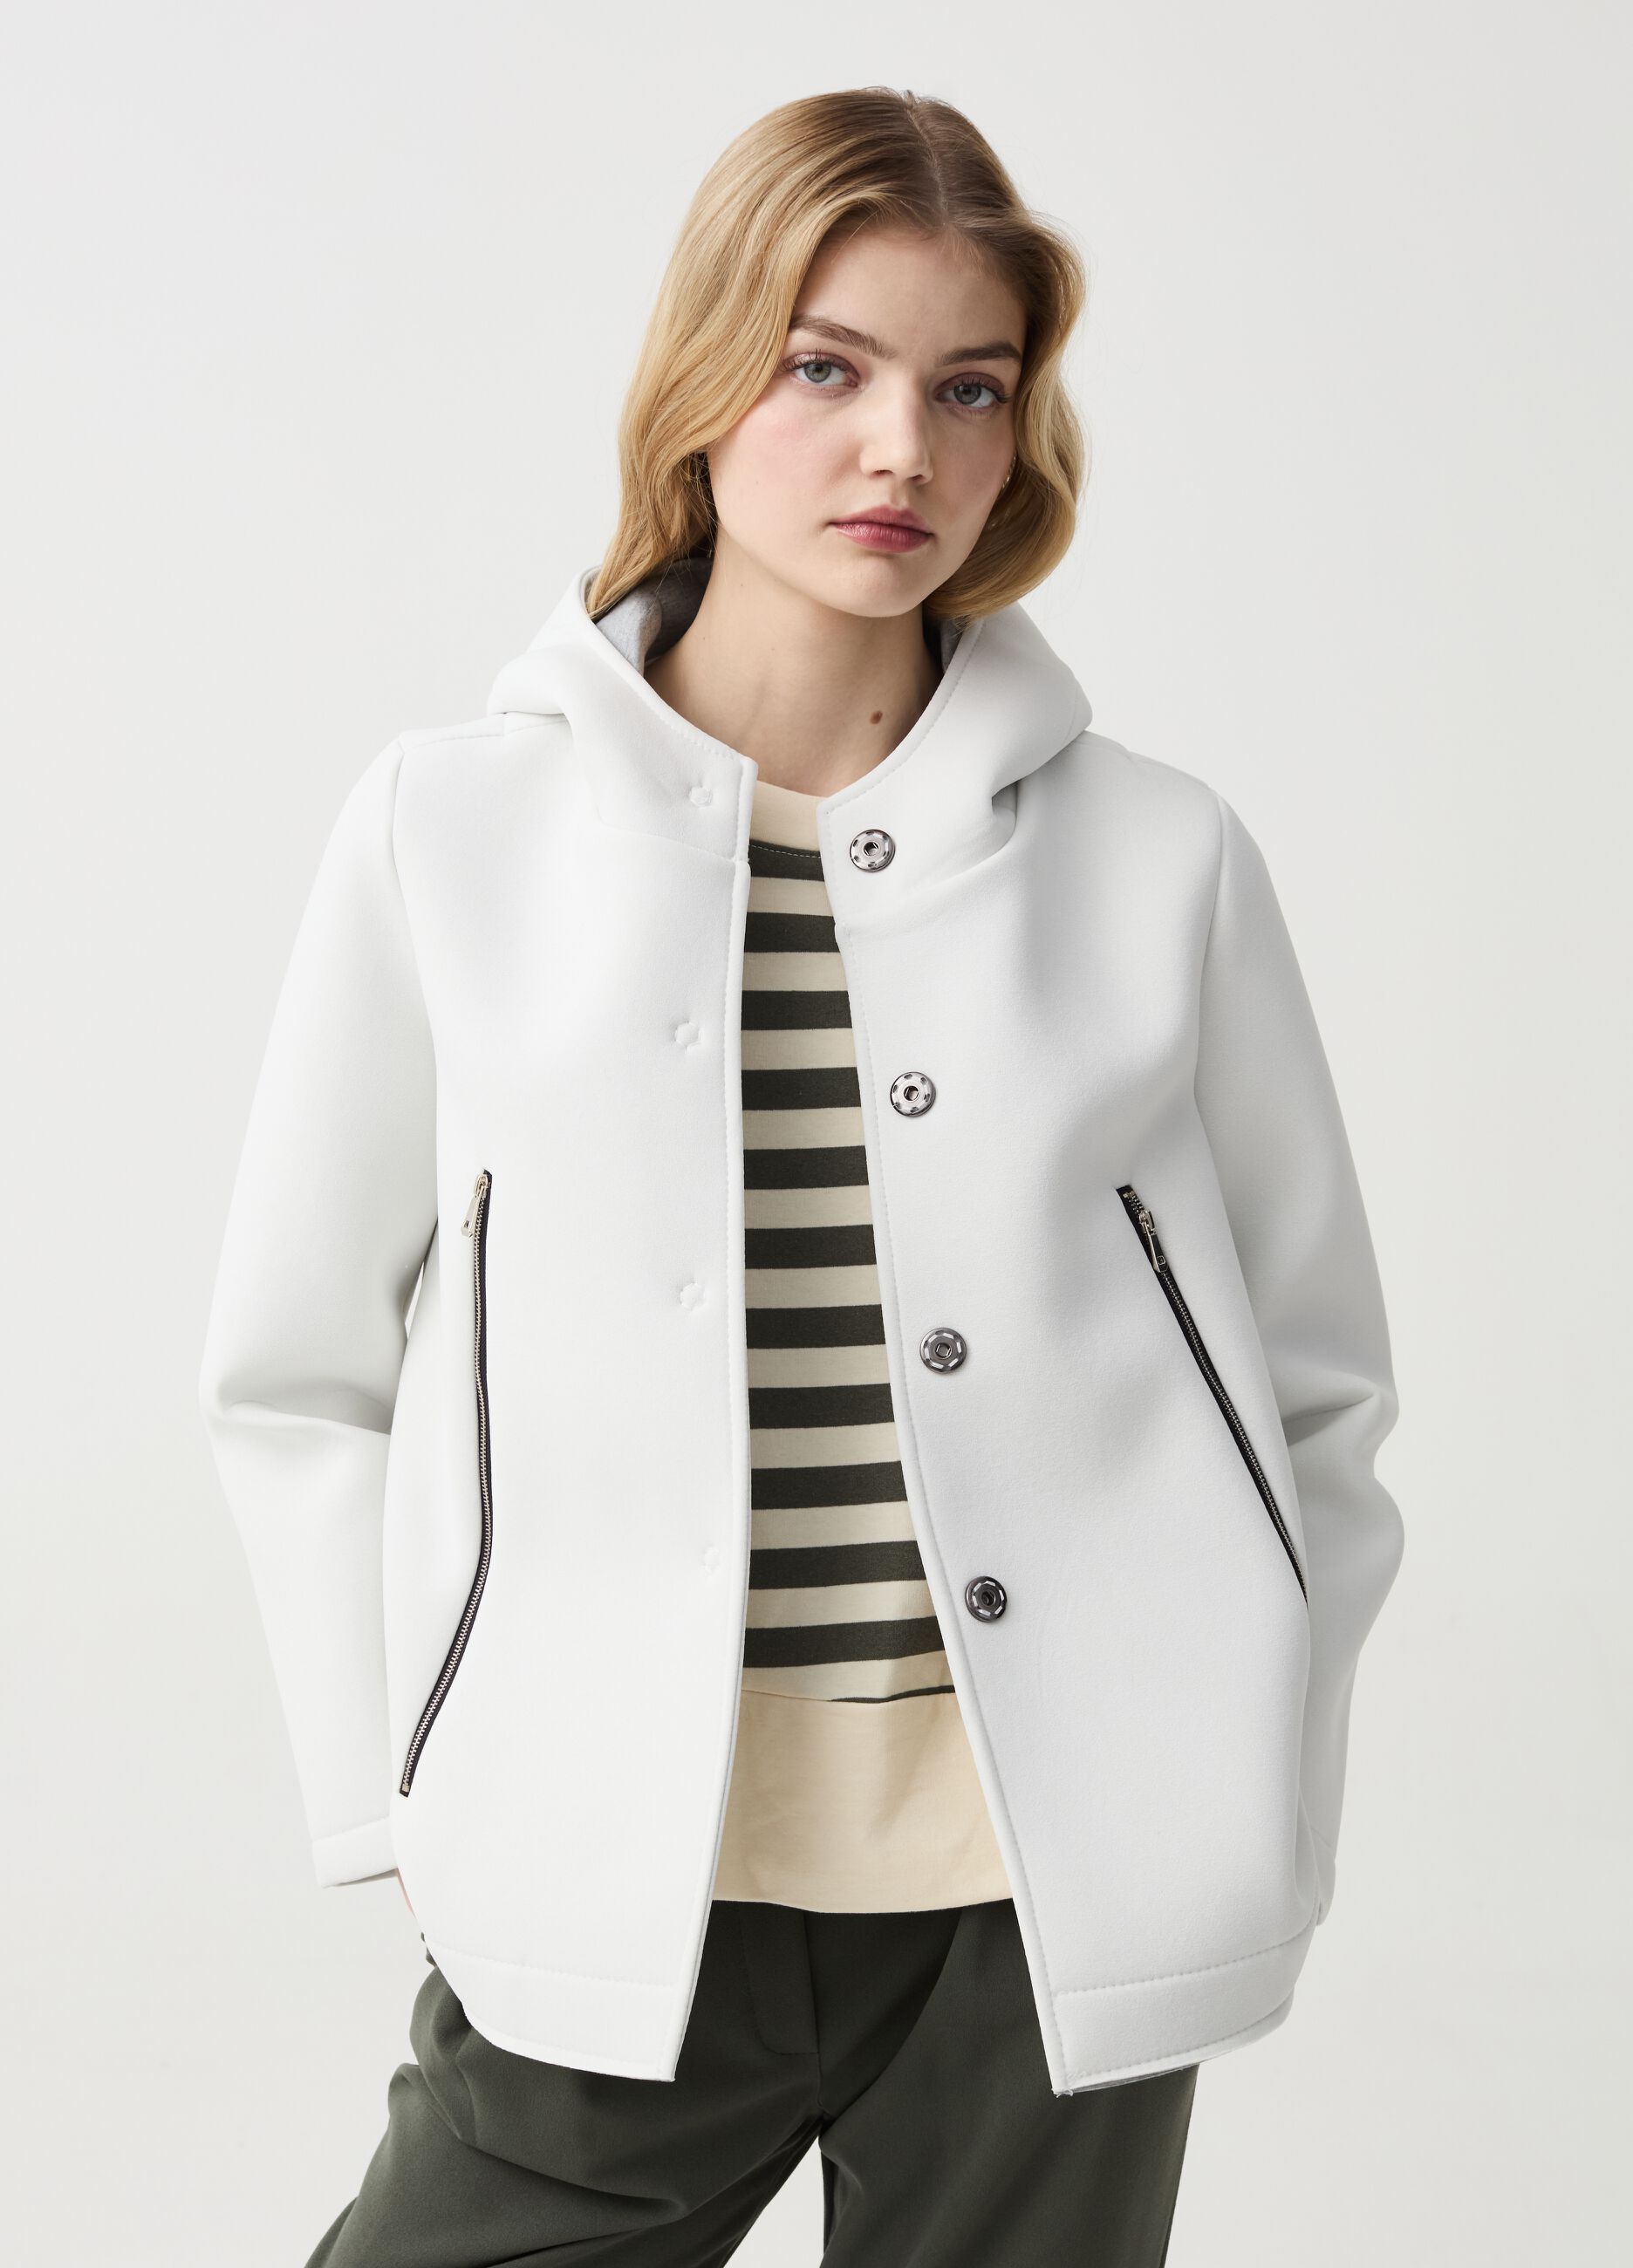 Cropped jacket with hood and zip pockets